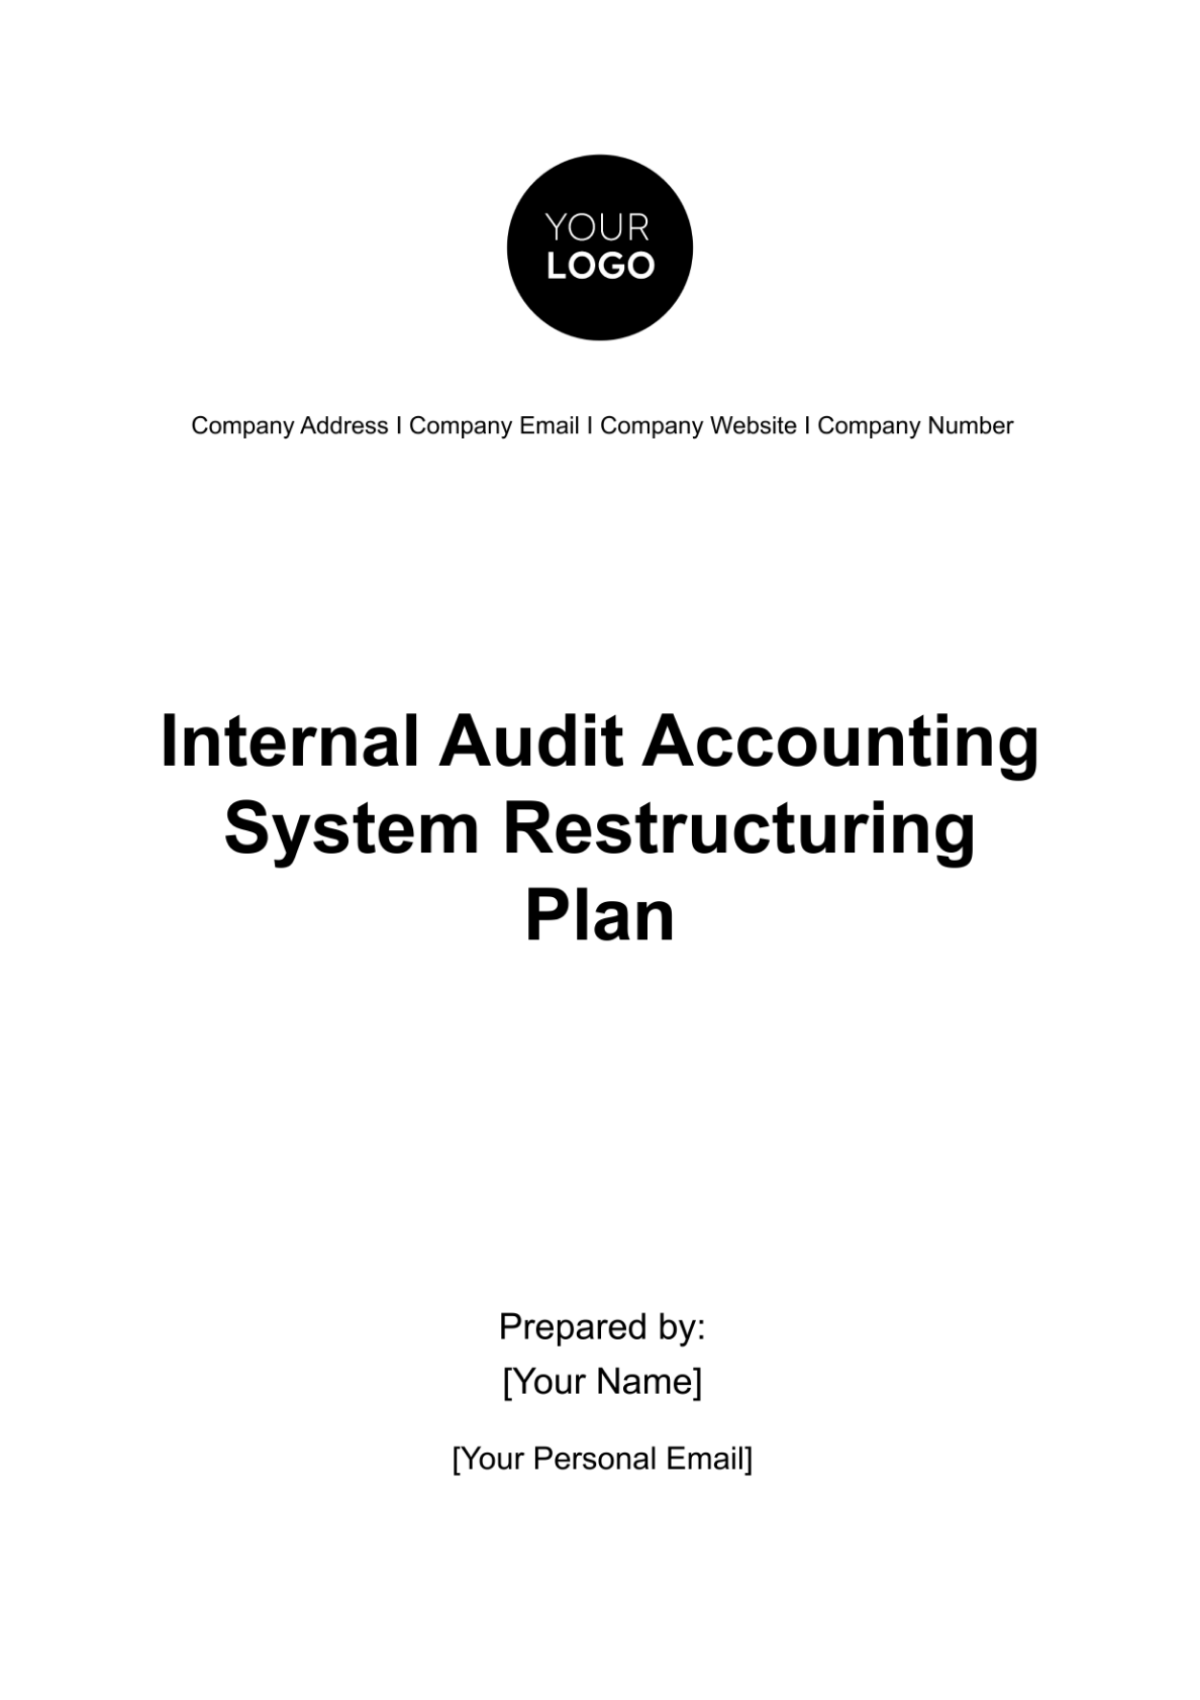 Free Internal Audit Accounting System Restructuring Plan Template